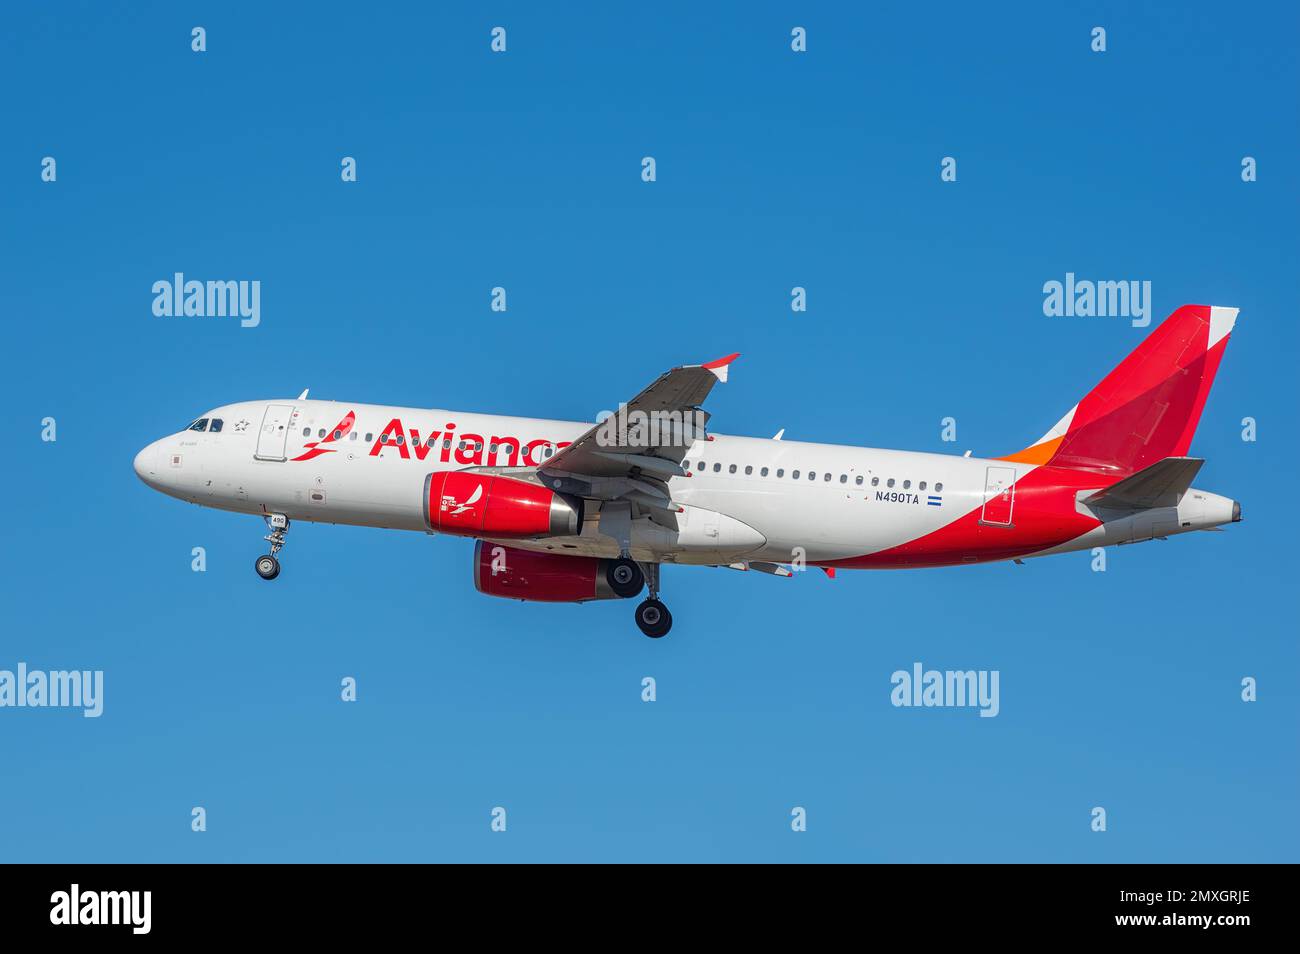 Los Angeles, California, United States - December 26, 2021: Avianca Airbus A320-233 aircraft with registration N490TA shown moments before landing at Stock Photo